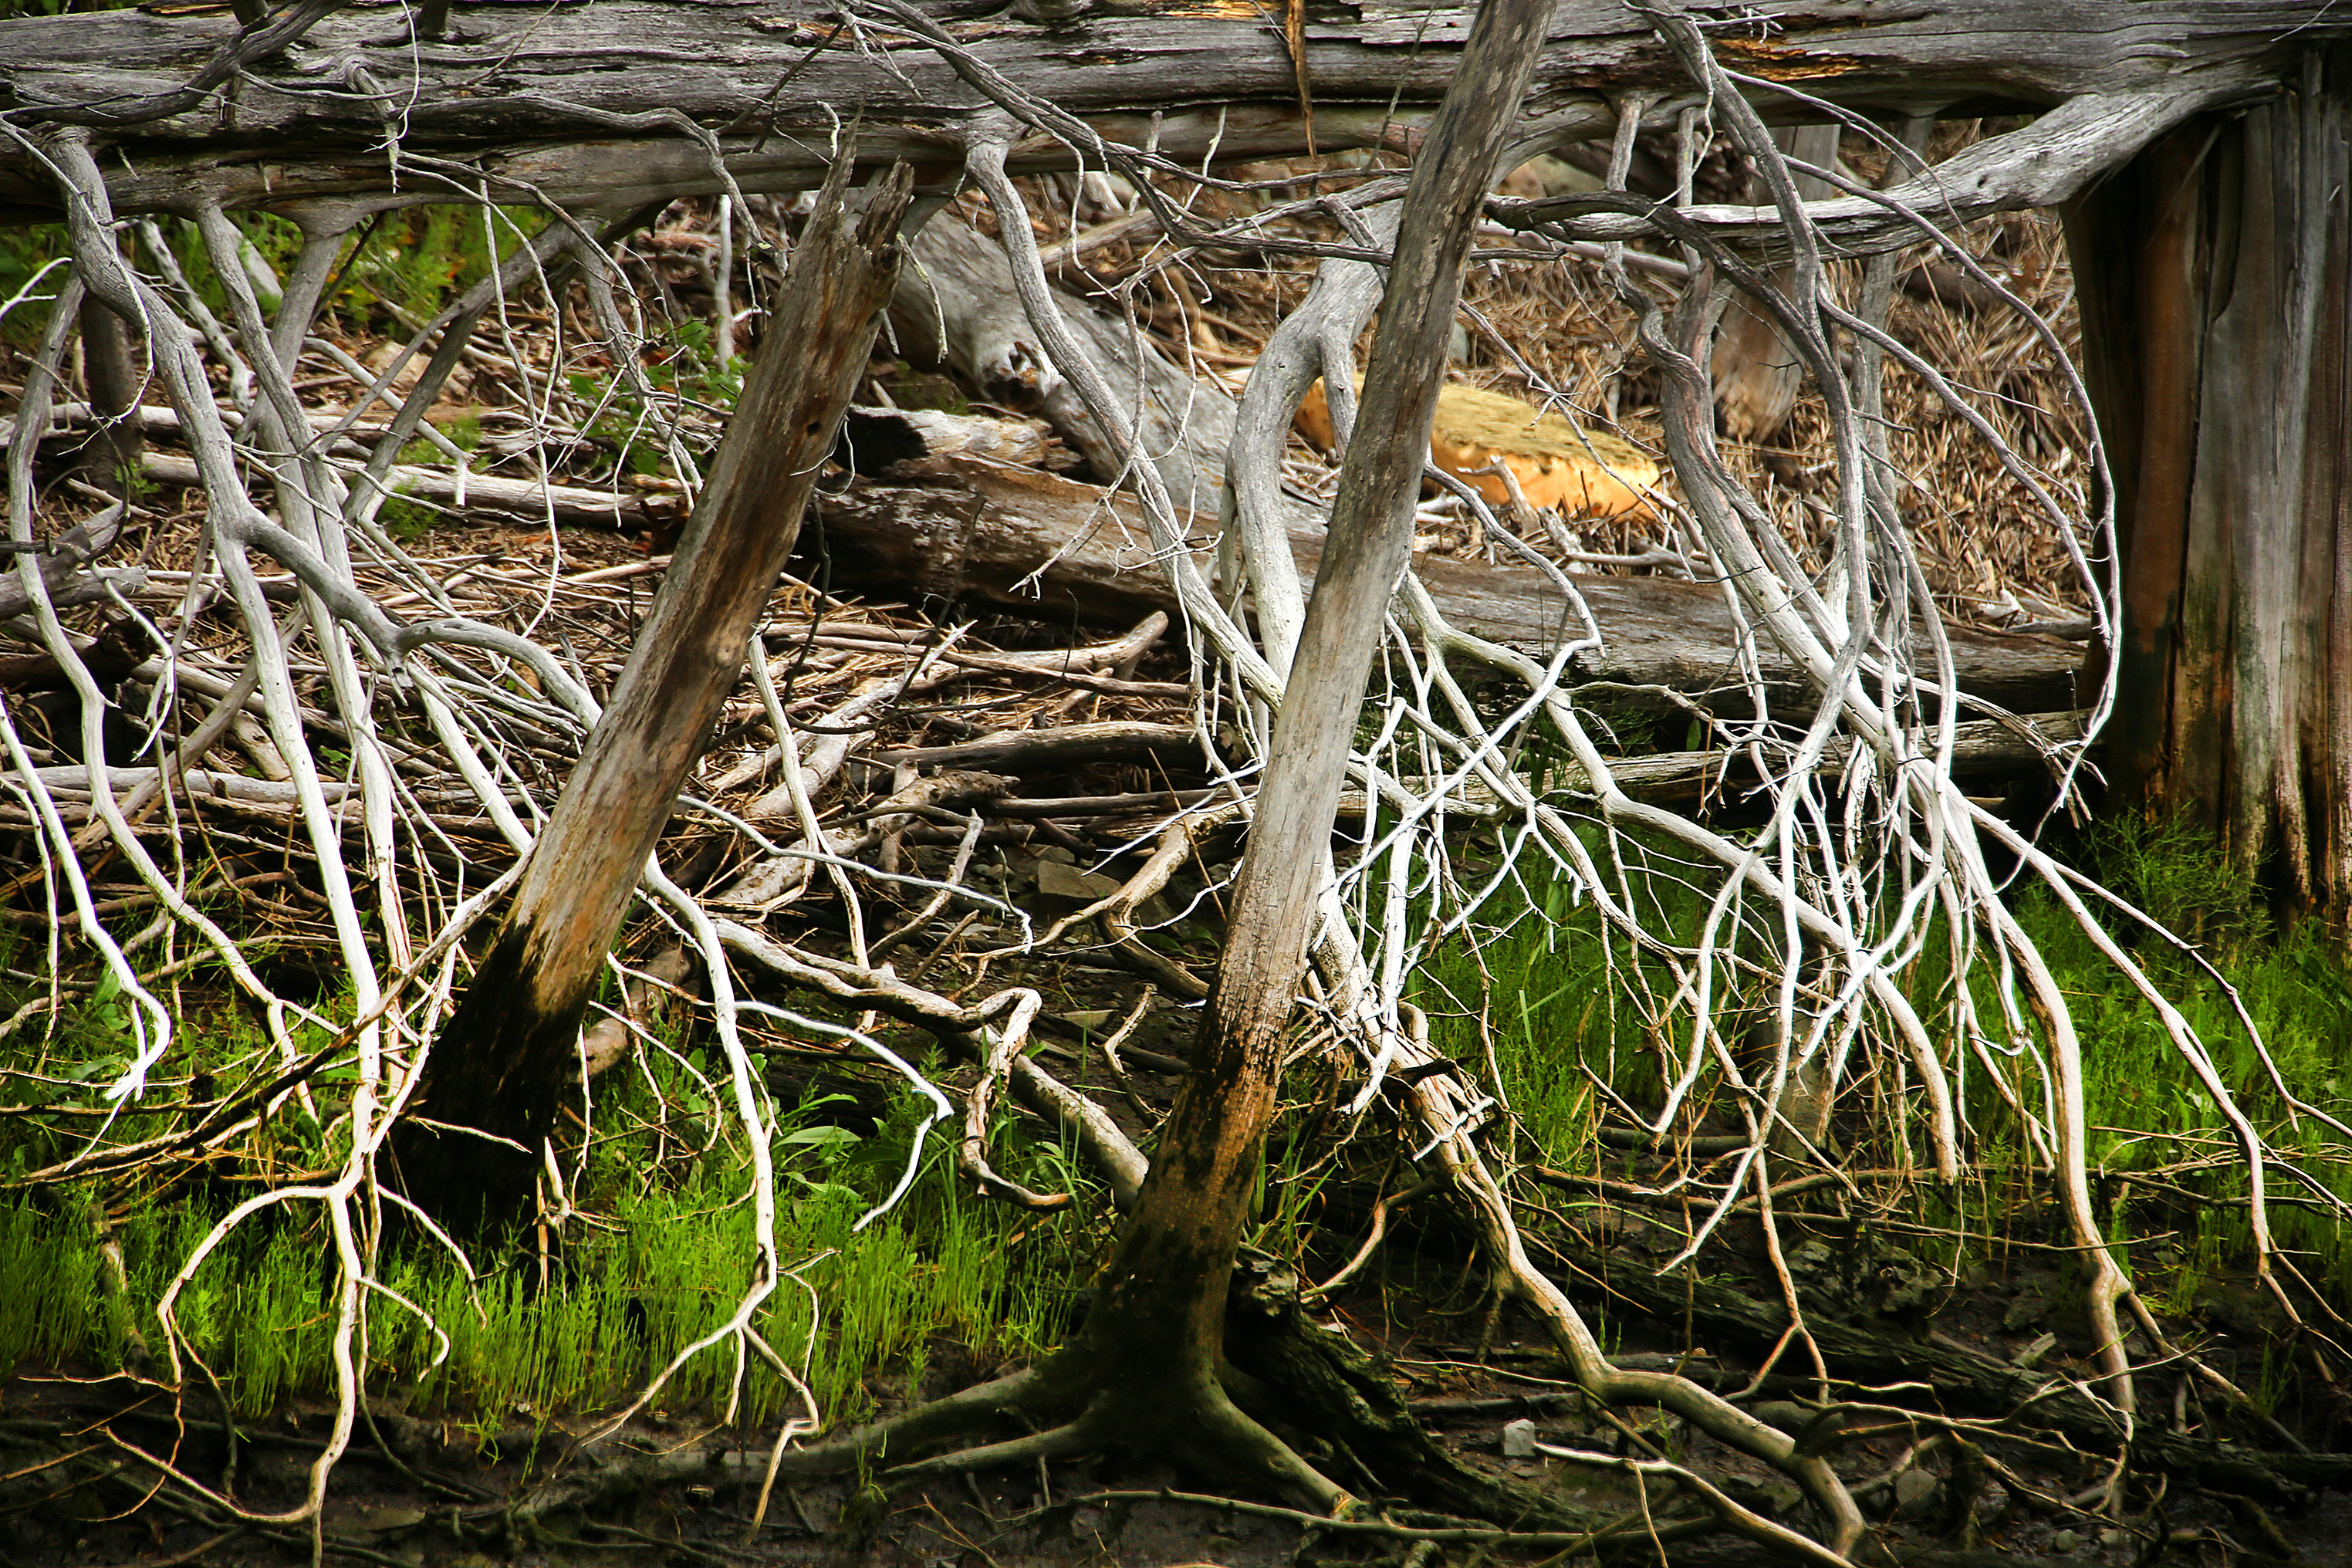 Tree roots form a pattern along the shoreline at Land's End.